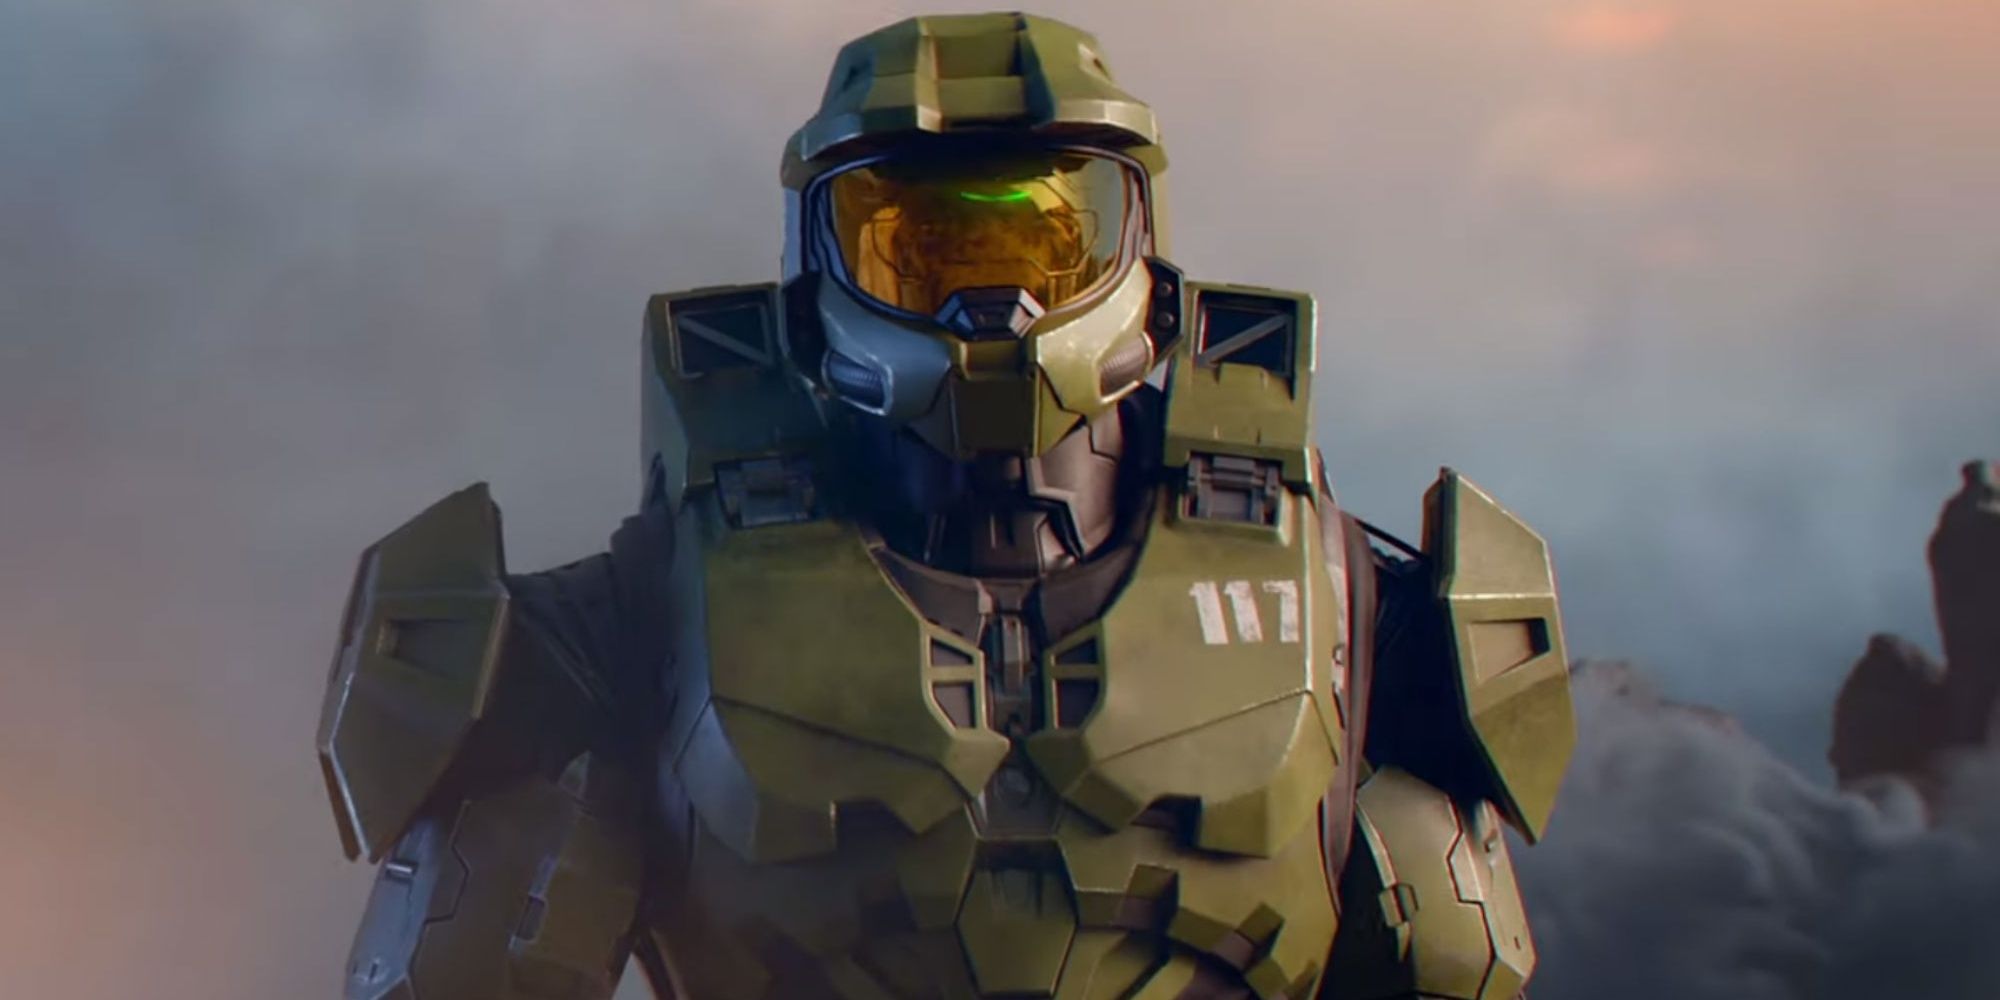 Halo: Master Chief In Profile Wearing Iconic Mjolnir Armor